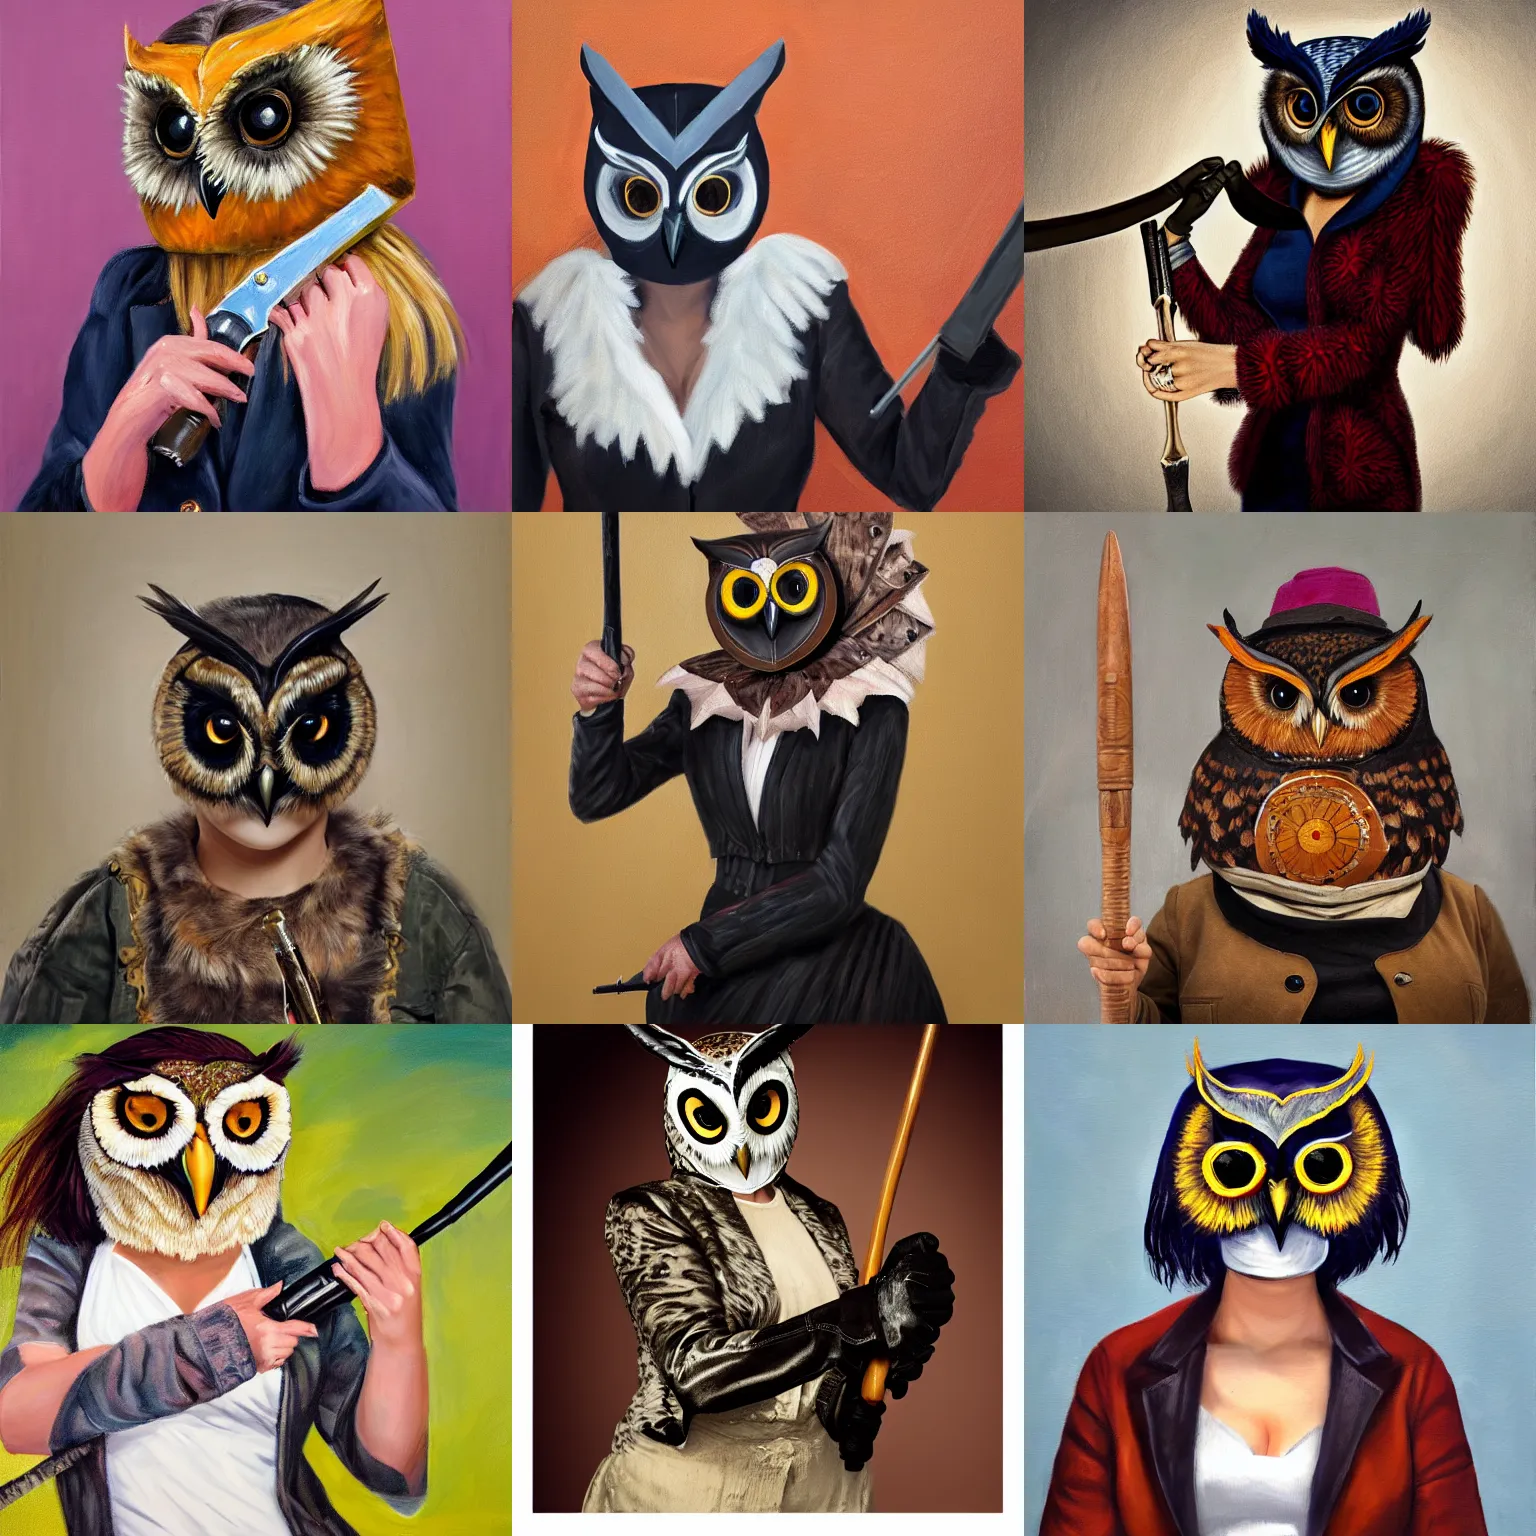 Prompt: an hd portrait painting of a woman in an owl mask. she is wearing a jacket, and is brandishing a weapon menacingly.